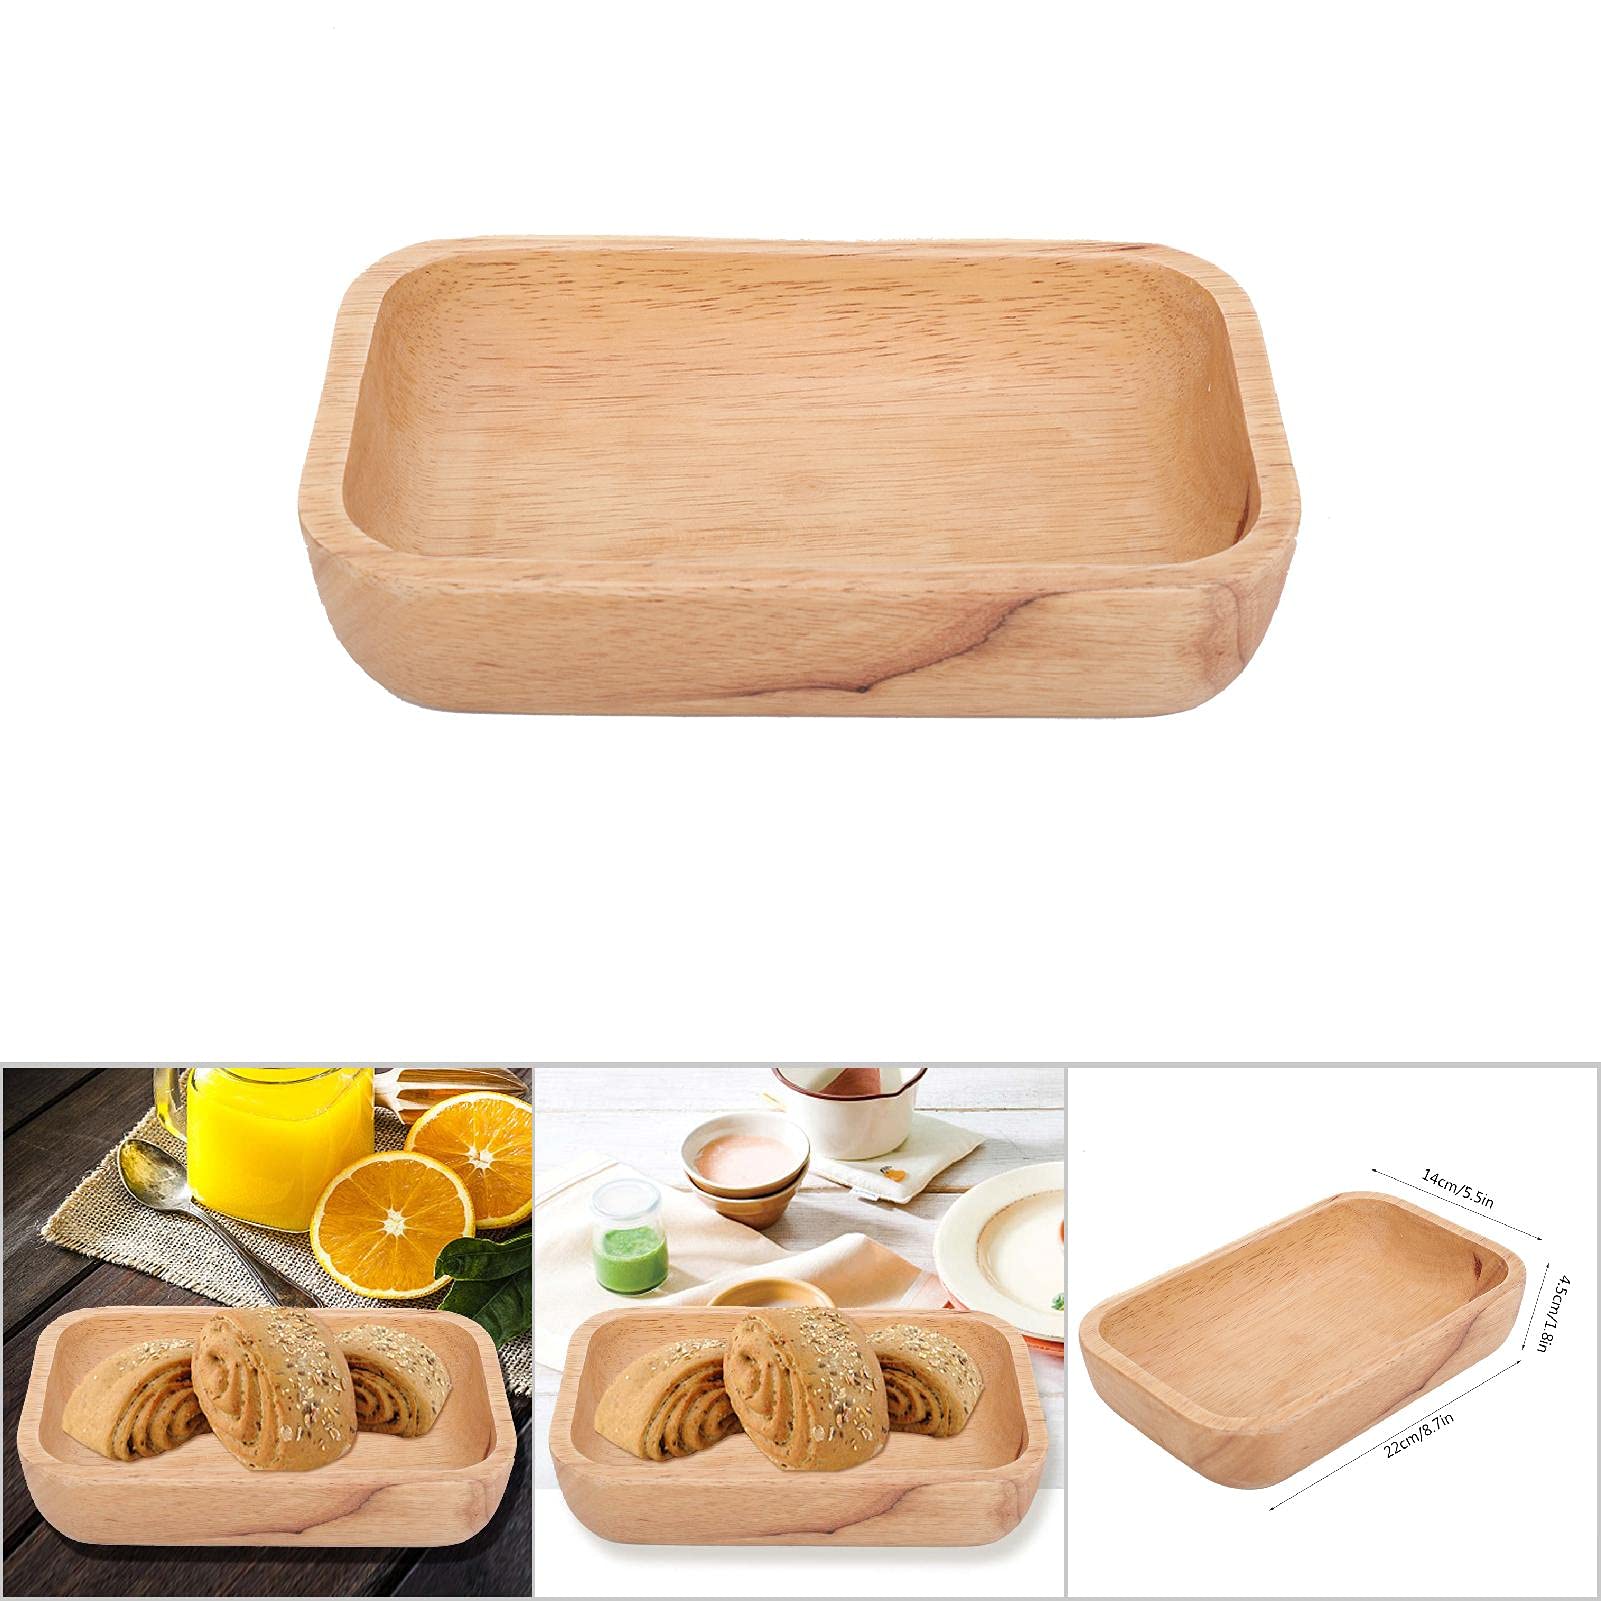 Uxsiya smooth Wooden Plate Wood Bowl for Snacks(22 * 14 * 4.5)